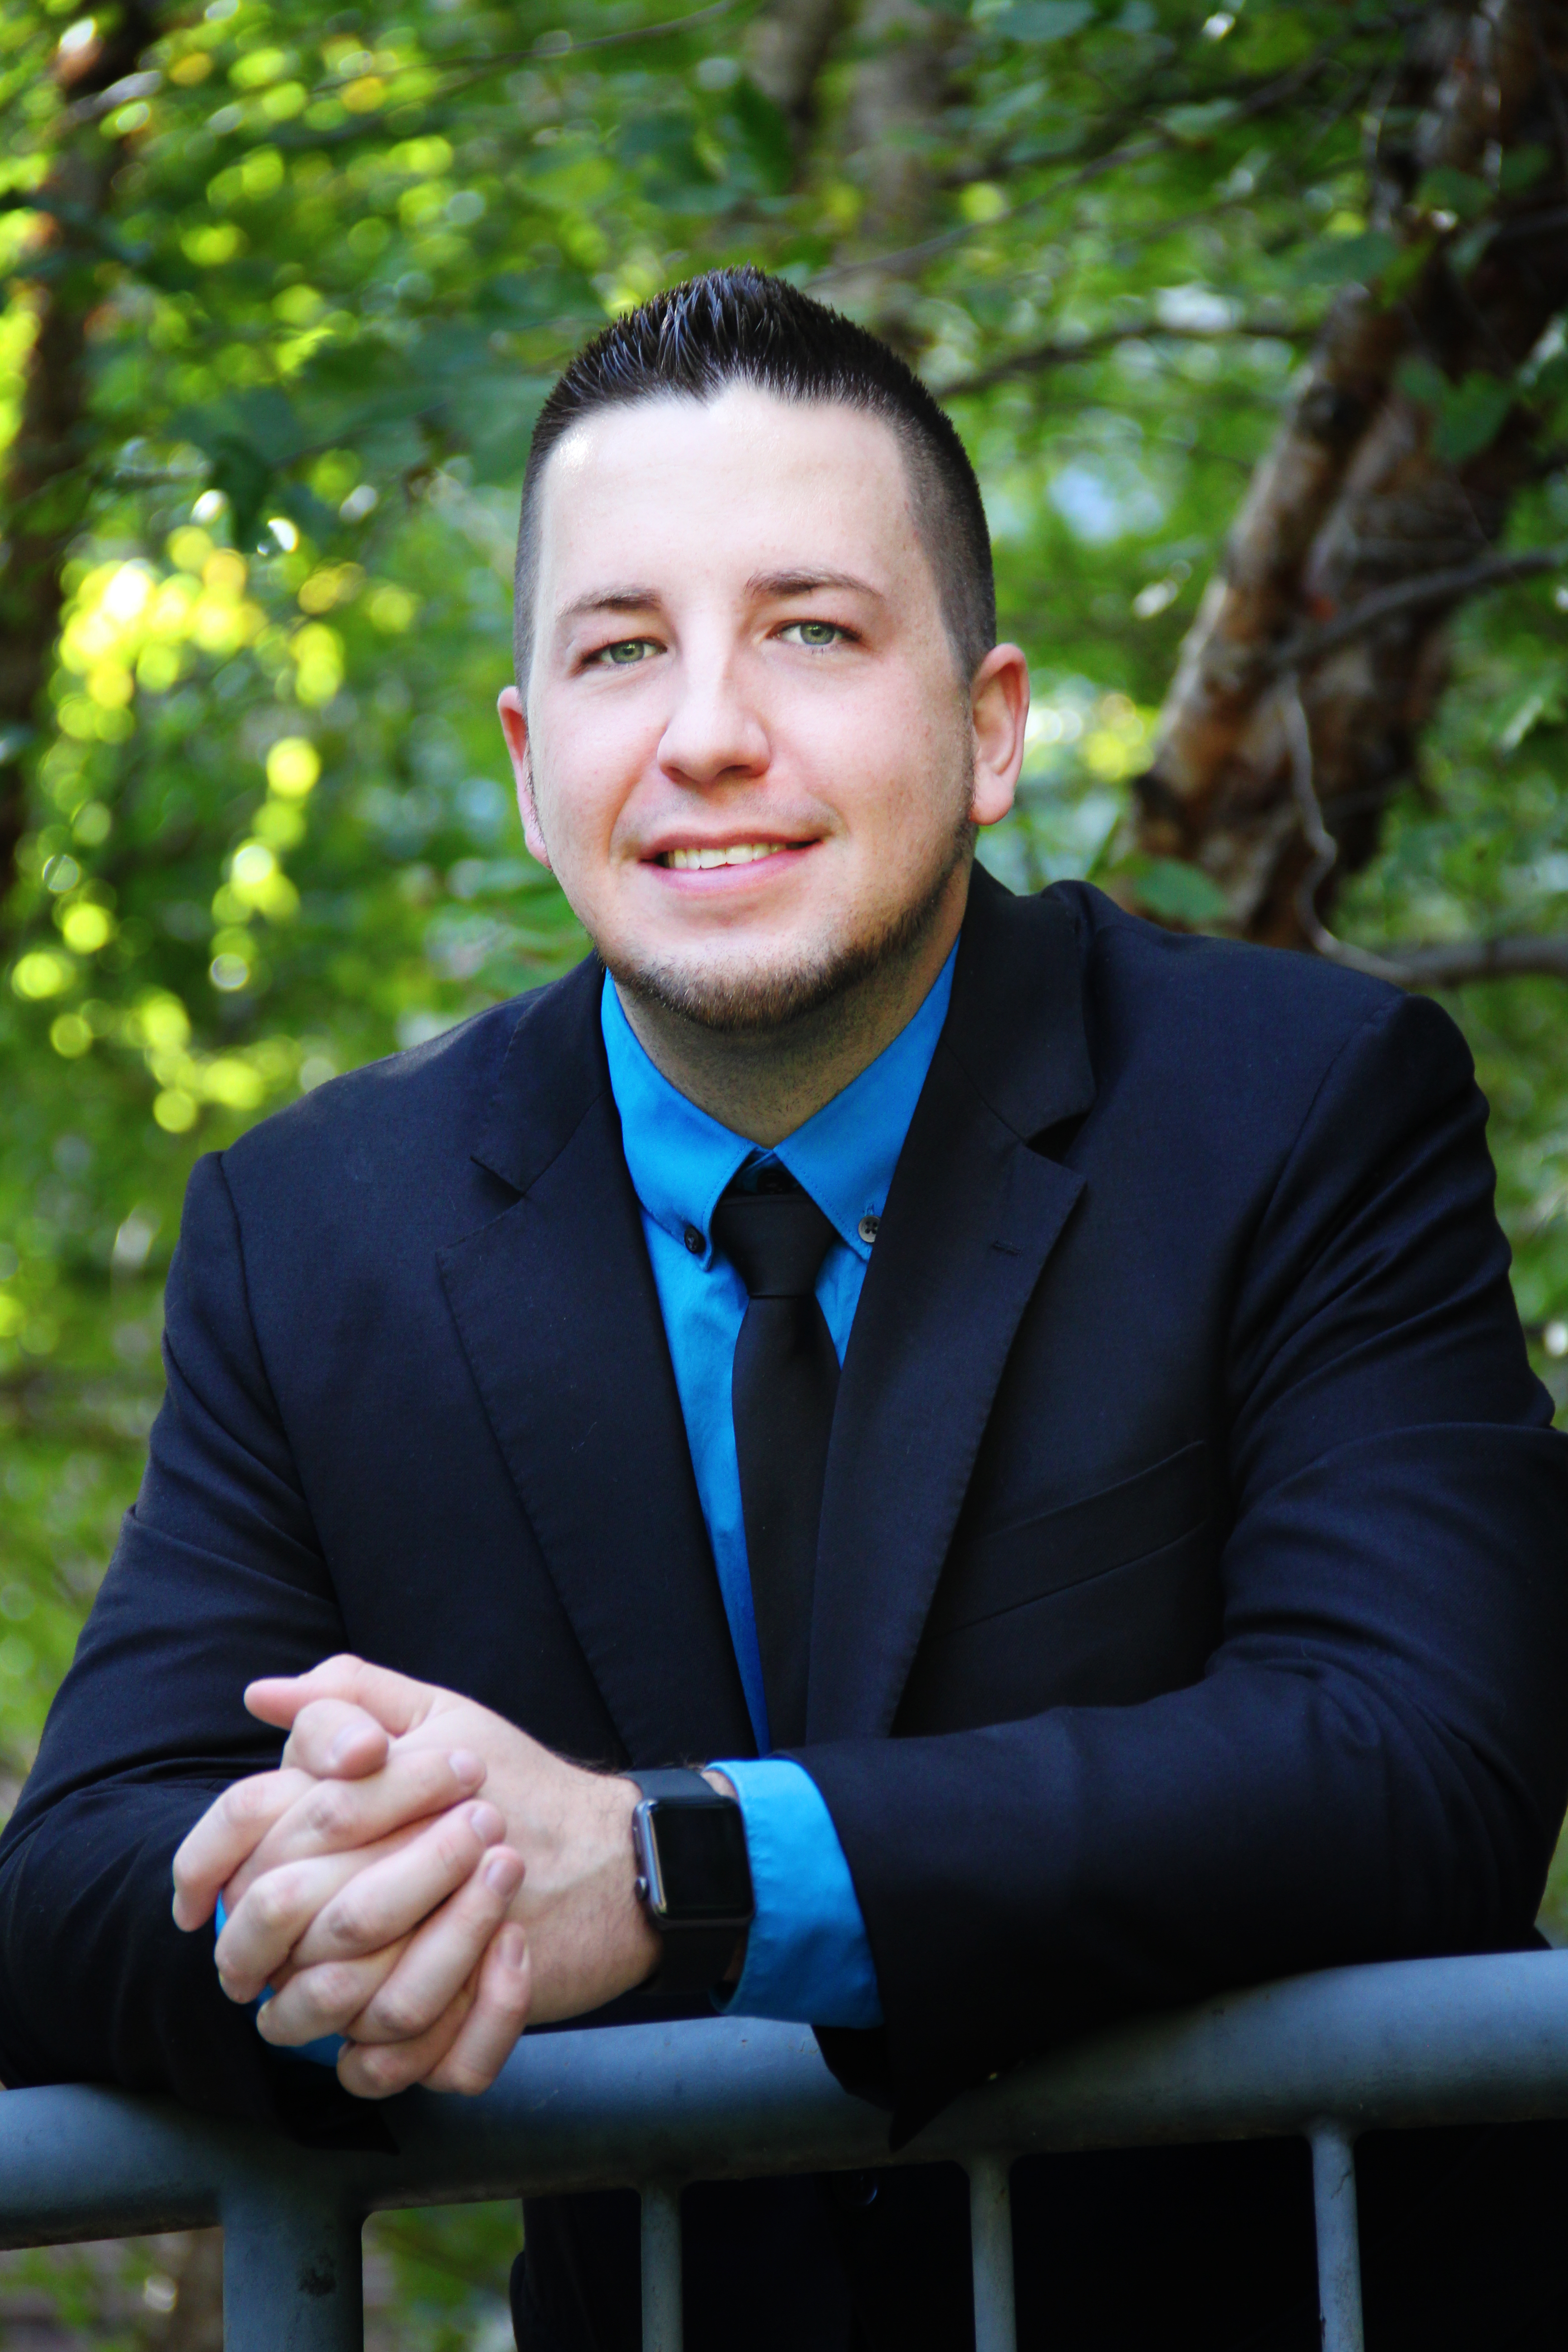 Ryan Frye - Accomplished digital forensics expert for Fortune 500 and Am Law 200 firms